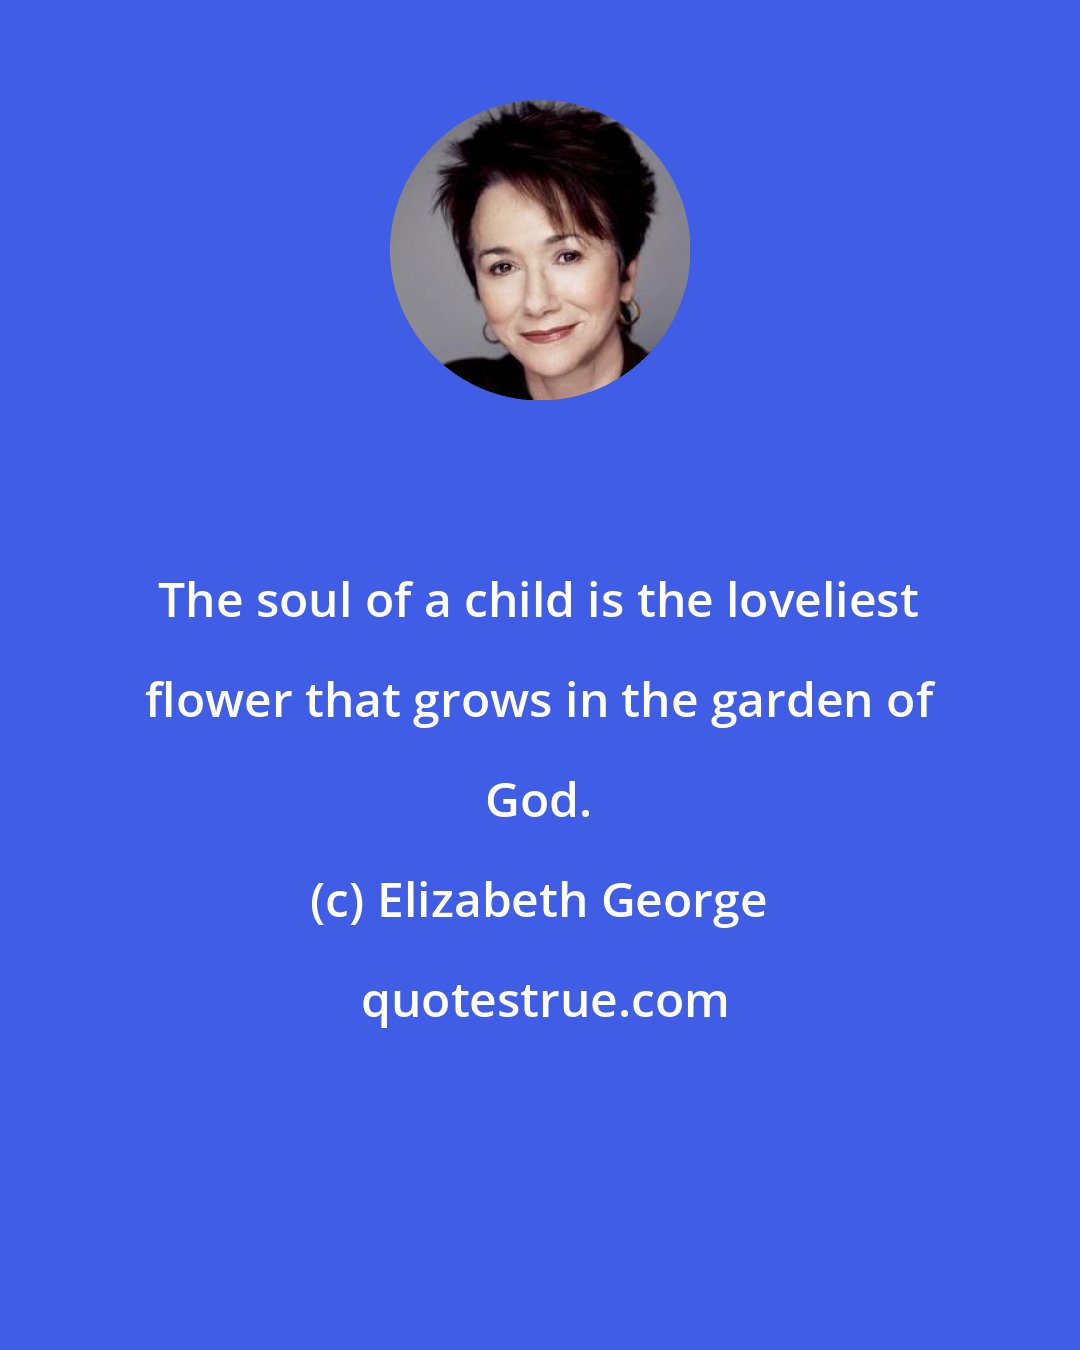 Elizabeth George: The soul of a child is the loveliest flower that grows in the garden of God.